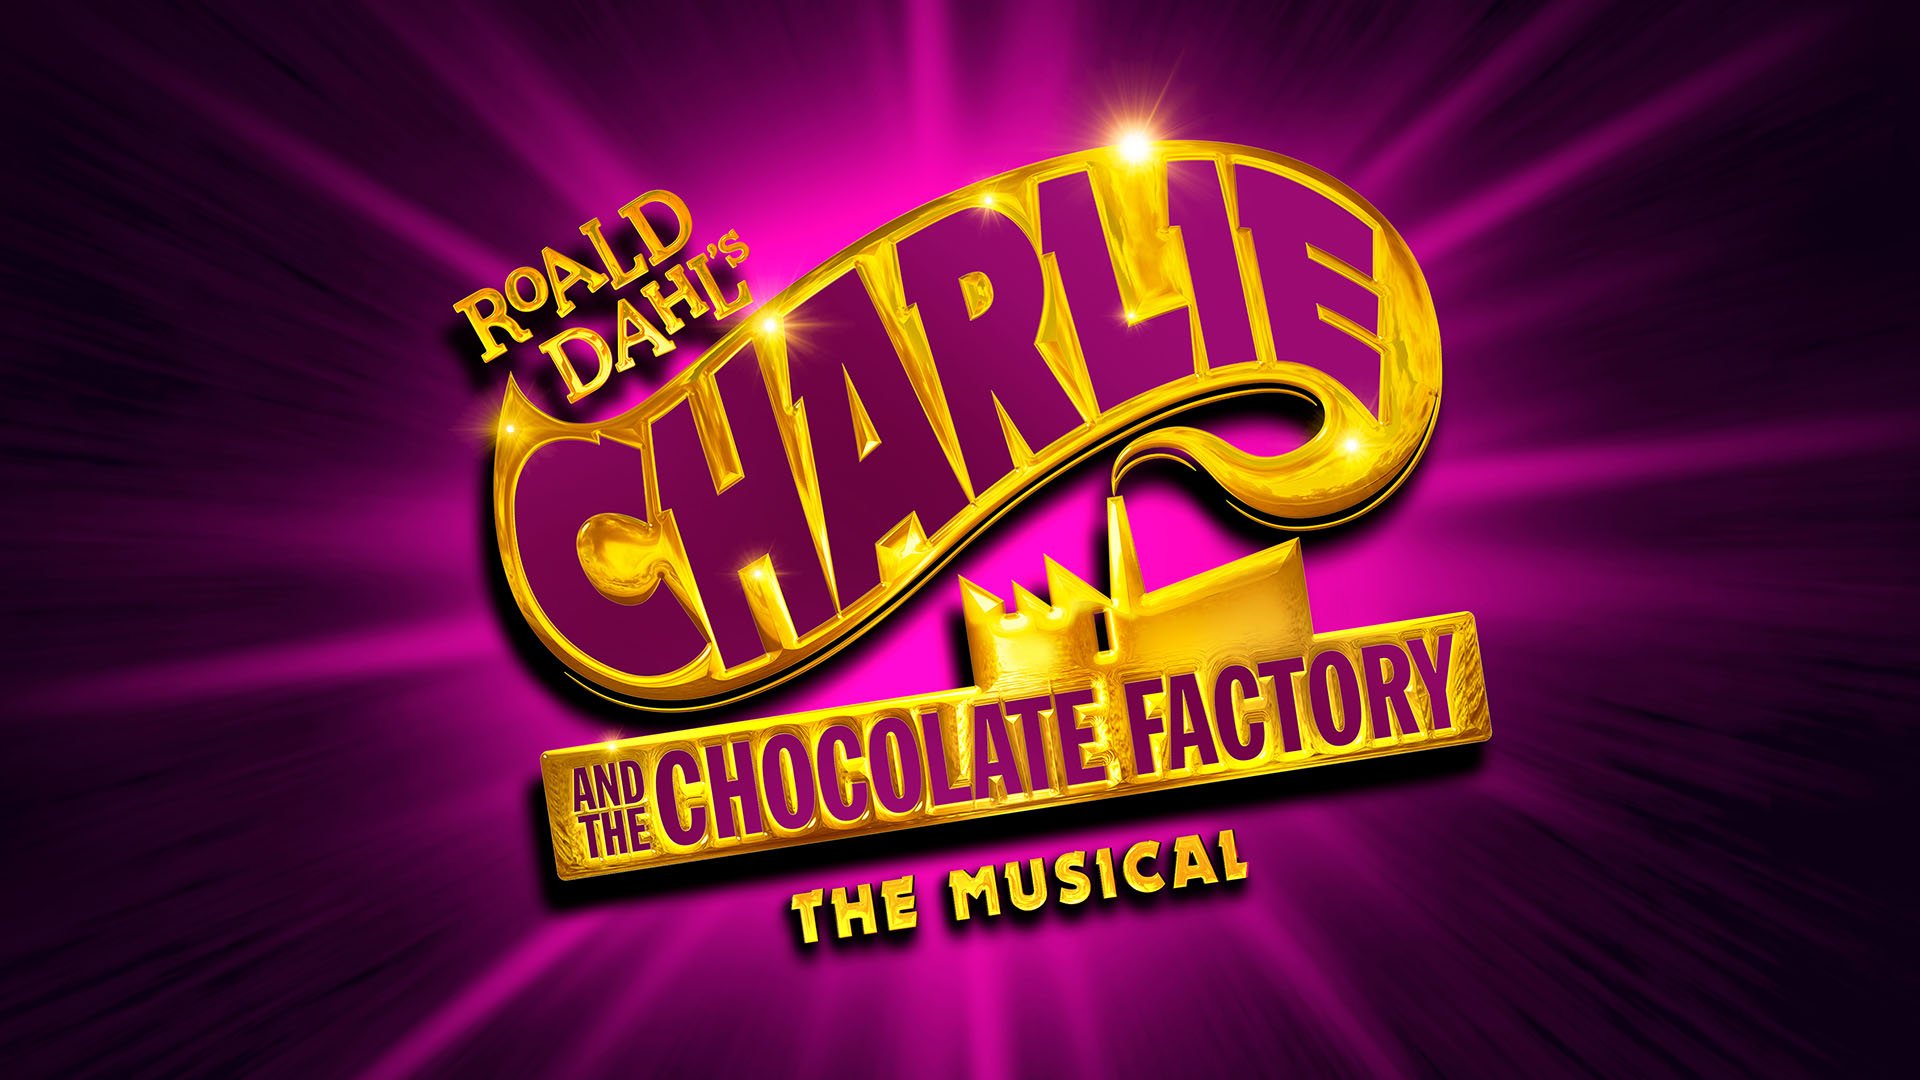 Charlie and the Chocolate Factory the Musical to open in MK